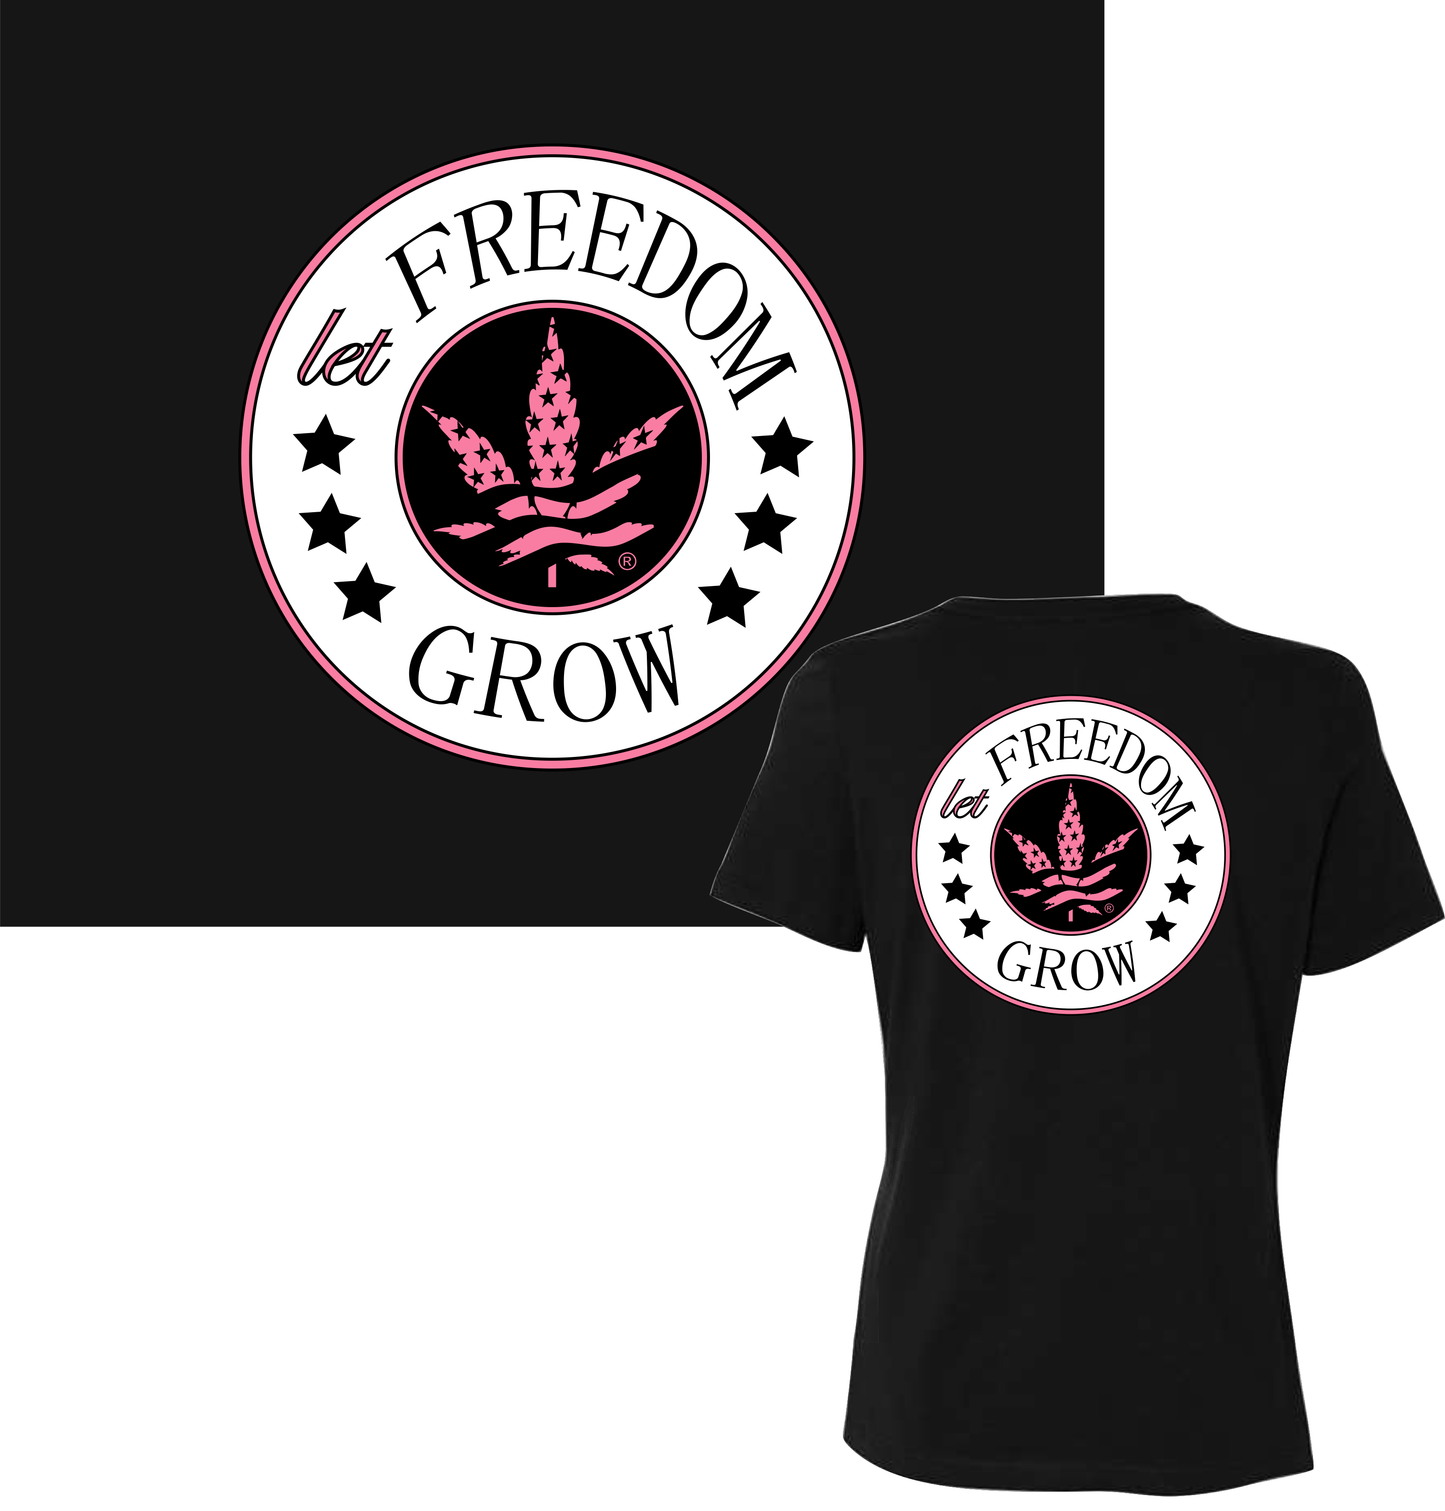 Let Freedom Grow- Black & Pink Shirt